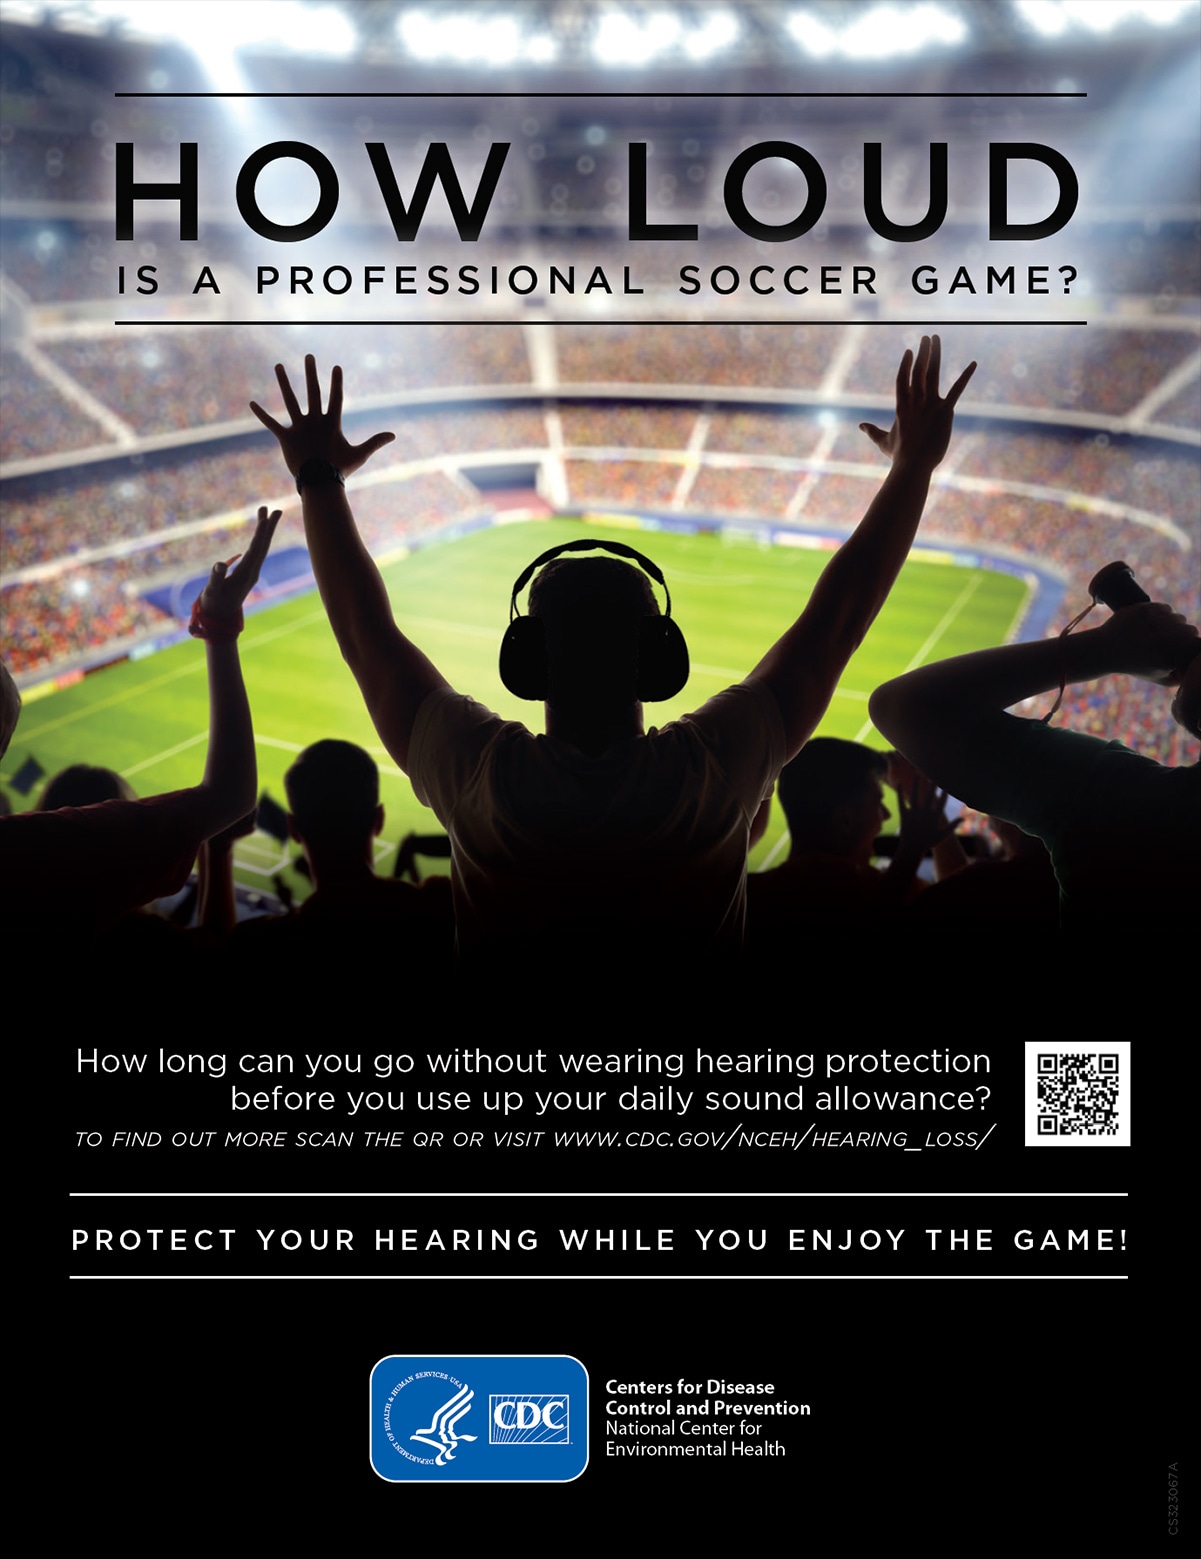 How Loud is a Professional Soccer Game? Visit www.cdc.gov/nceh/hearing_loss/ to learn more.